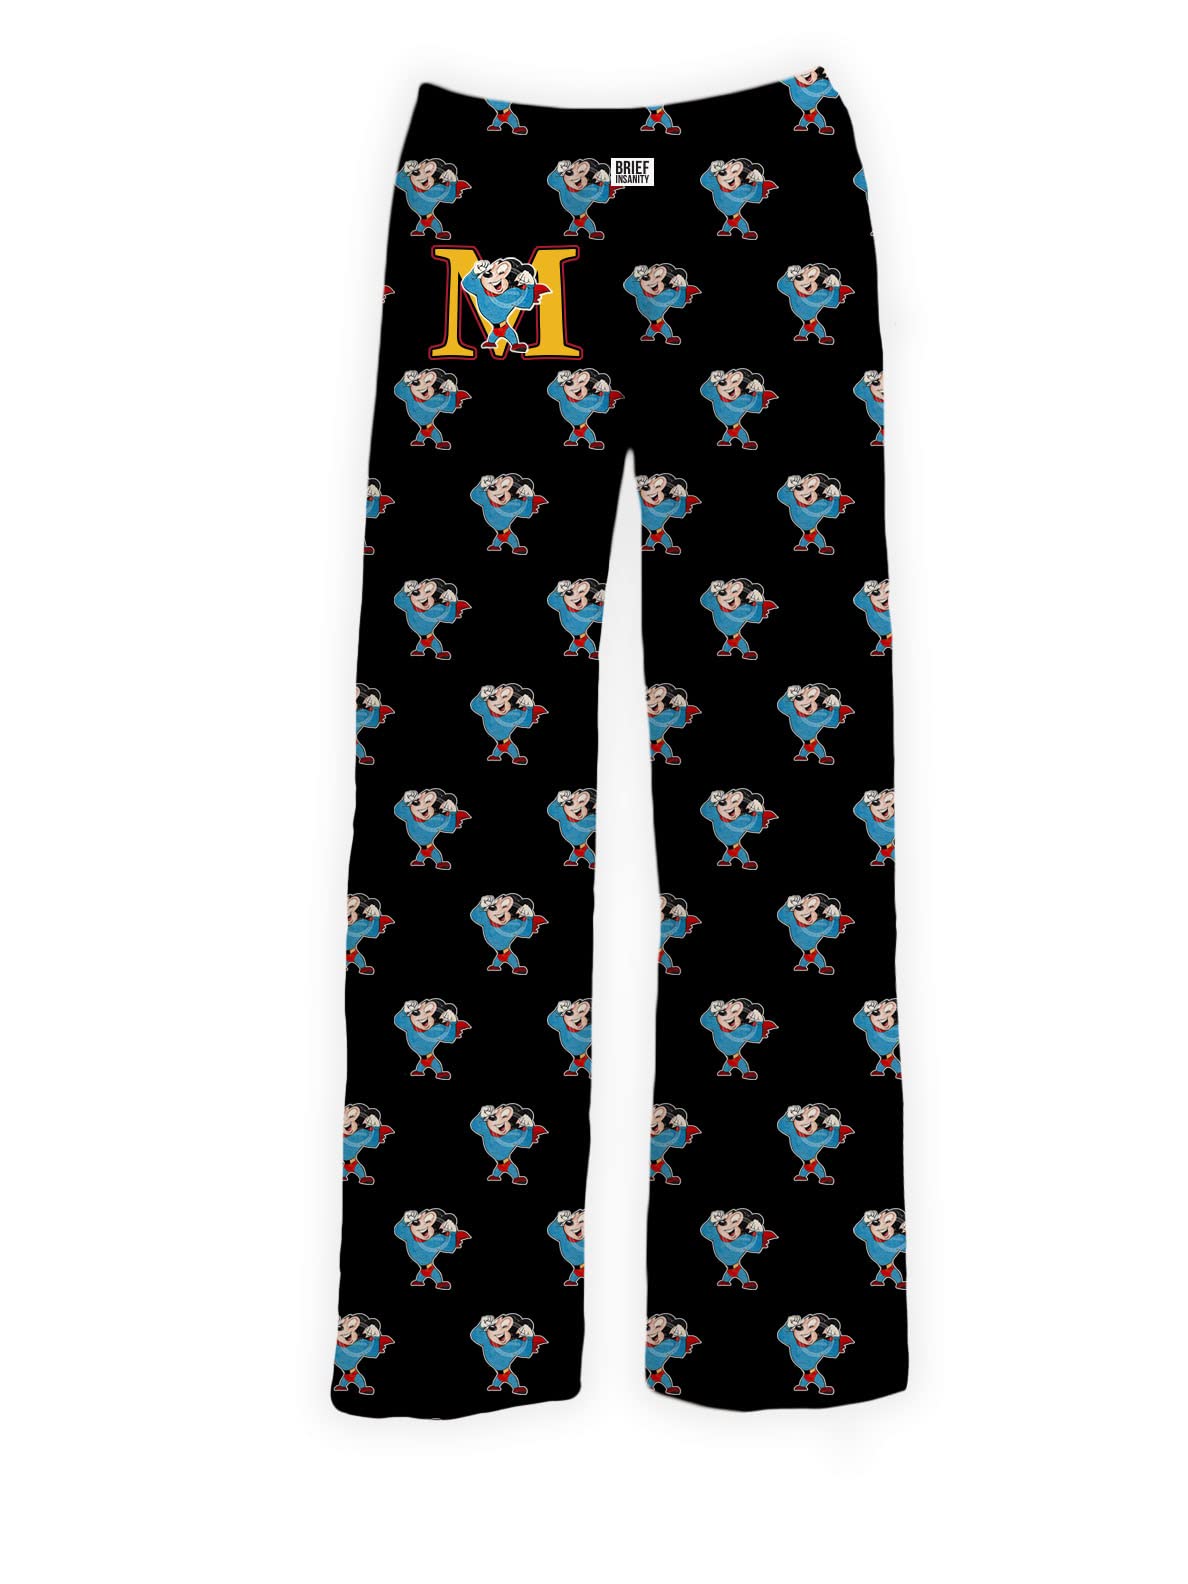 BRIEF INSANITY Mighty Mouse Pajama Lounge Pants